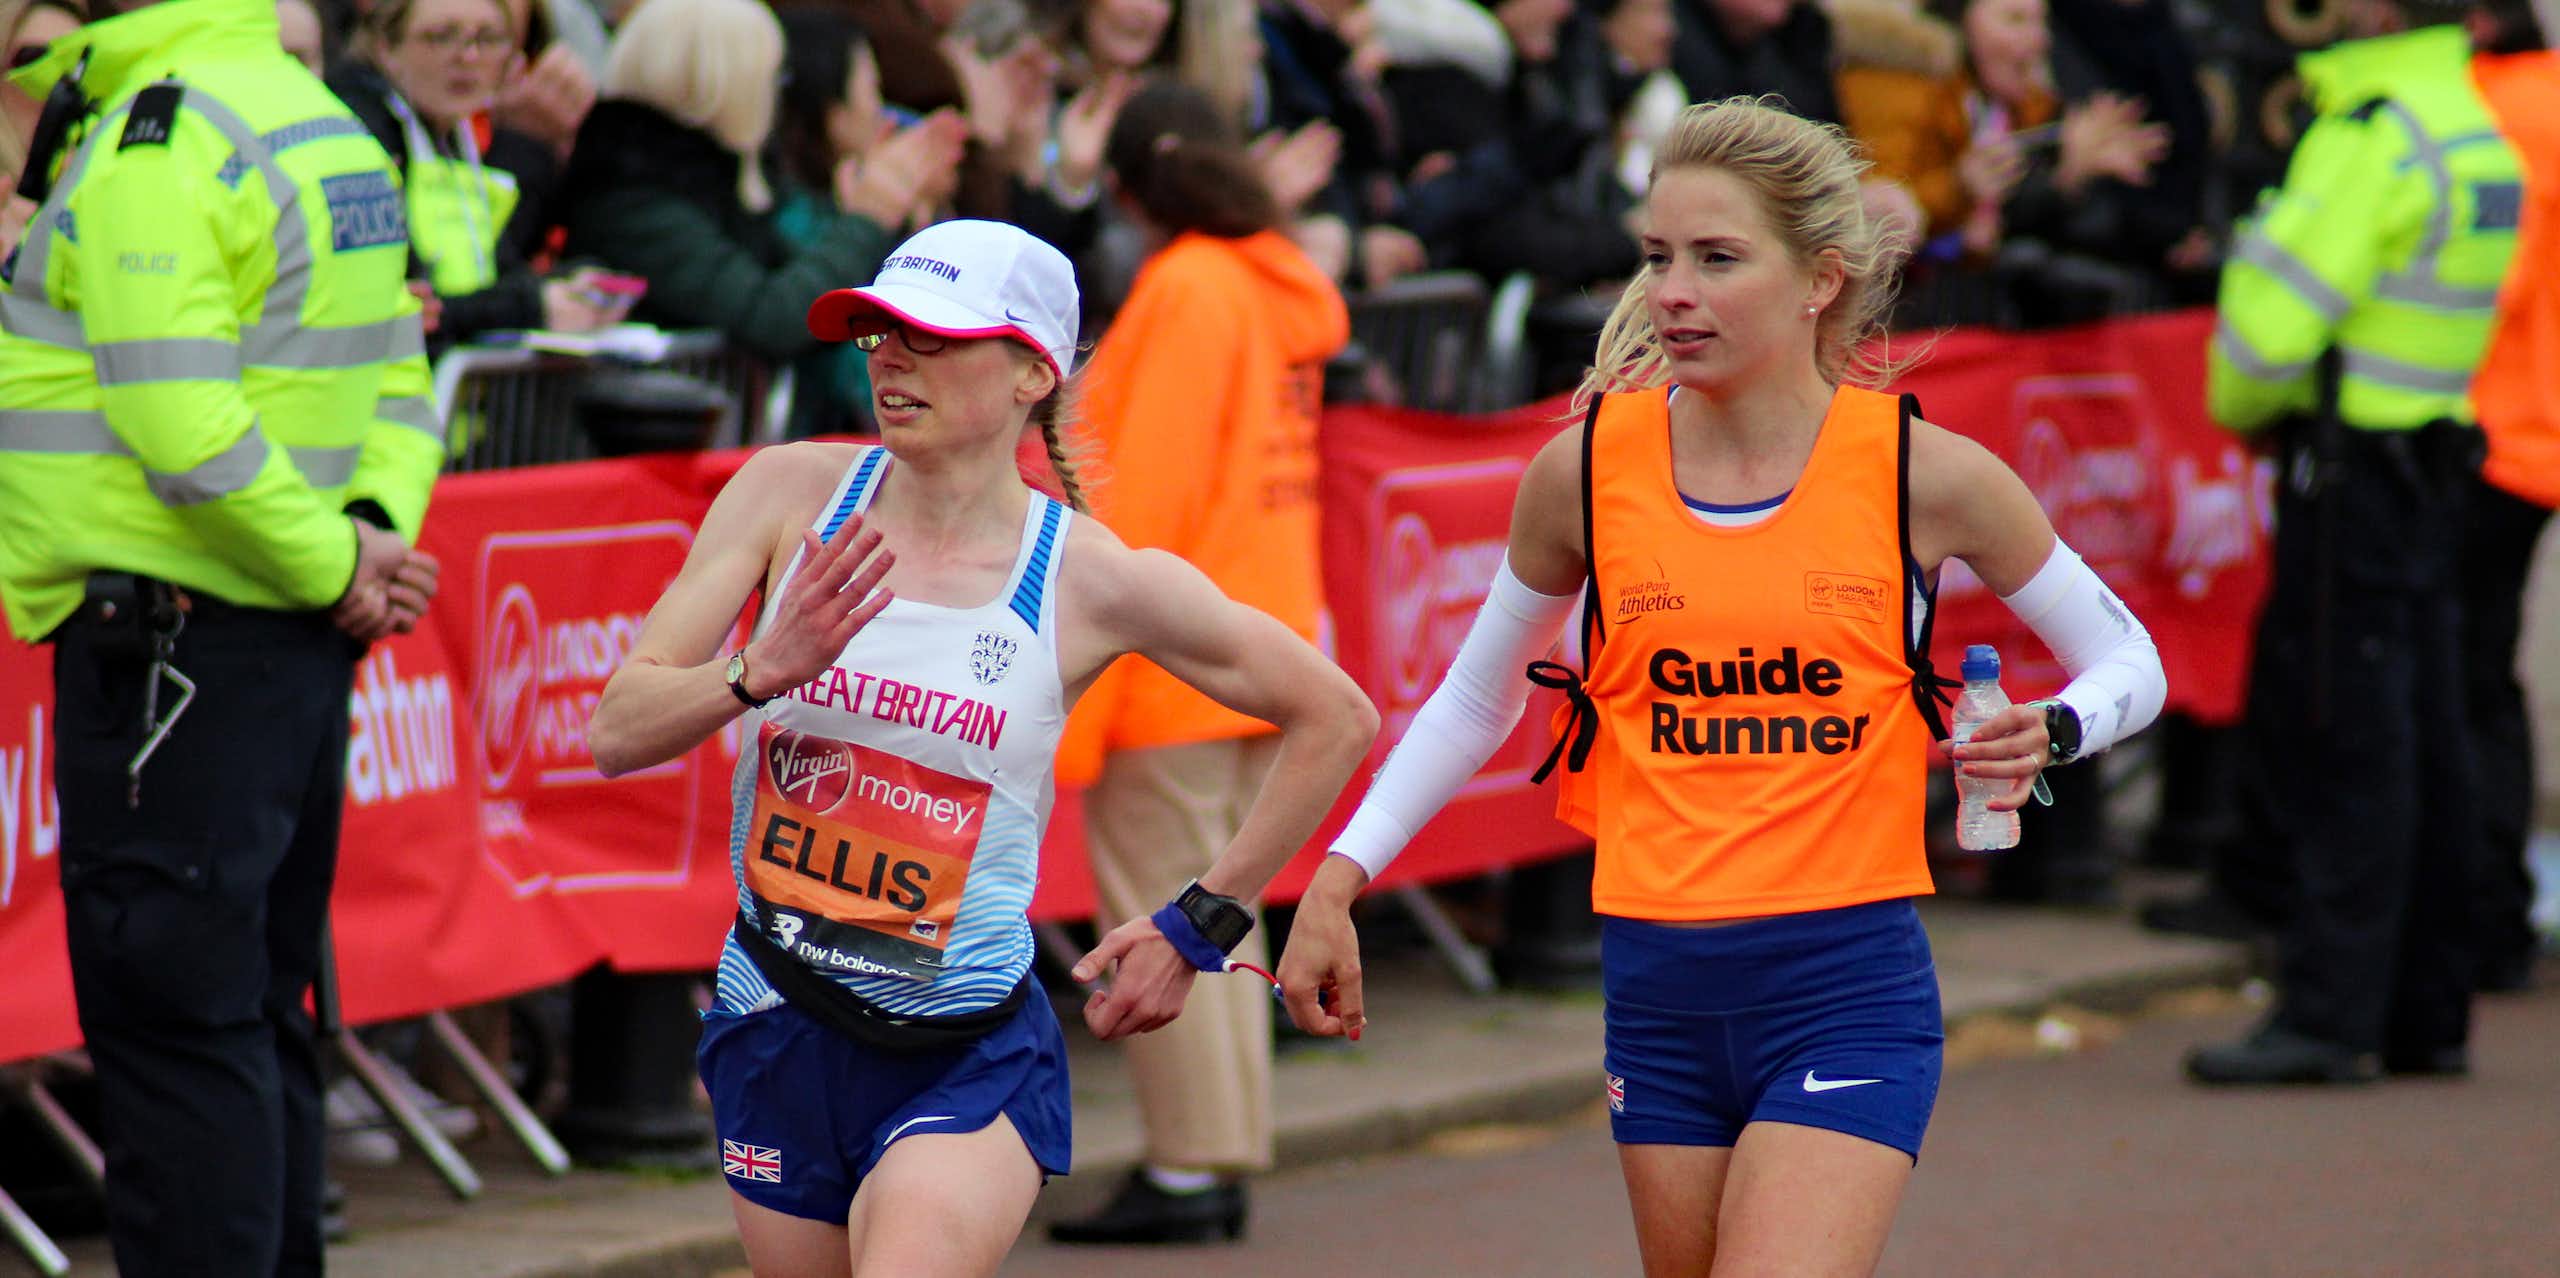 Two women running side by side, with a short tether connecting their wrists. Charlotte Ellis is wearing a race bib with her last name and a Great Britain vest, her guide runner is wearing a flourescent orange Guide Runner vest